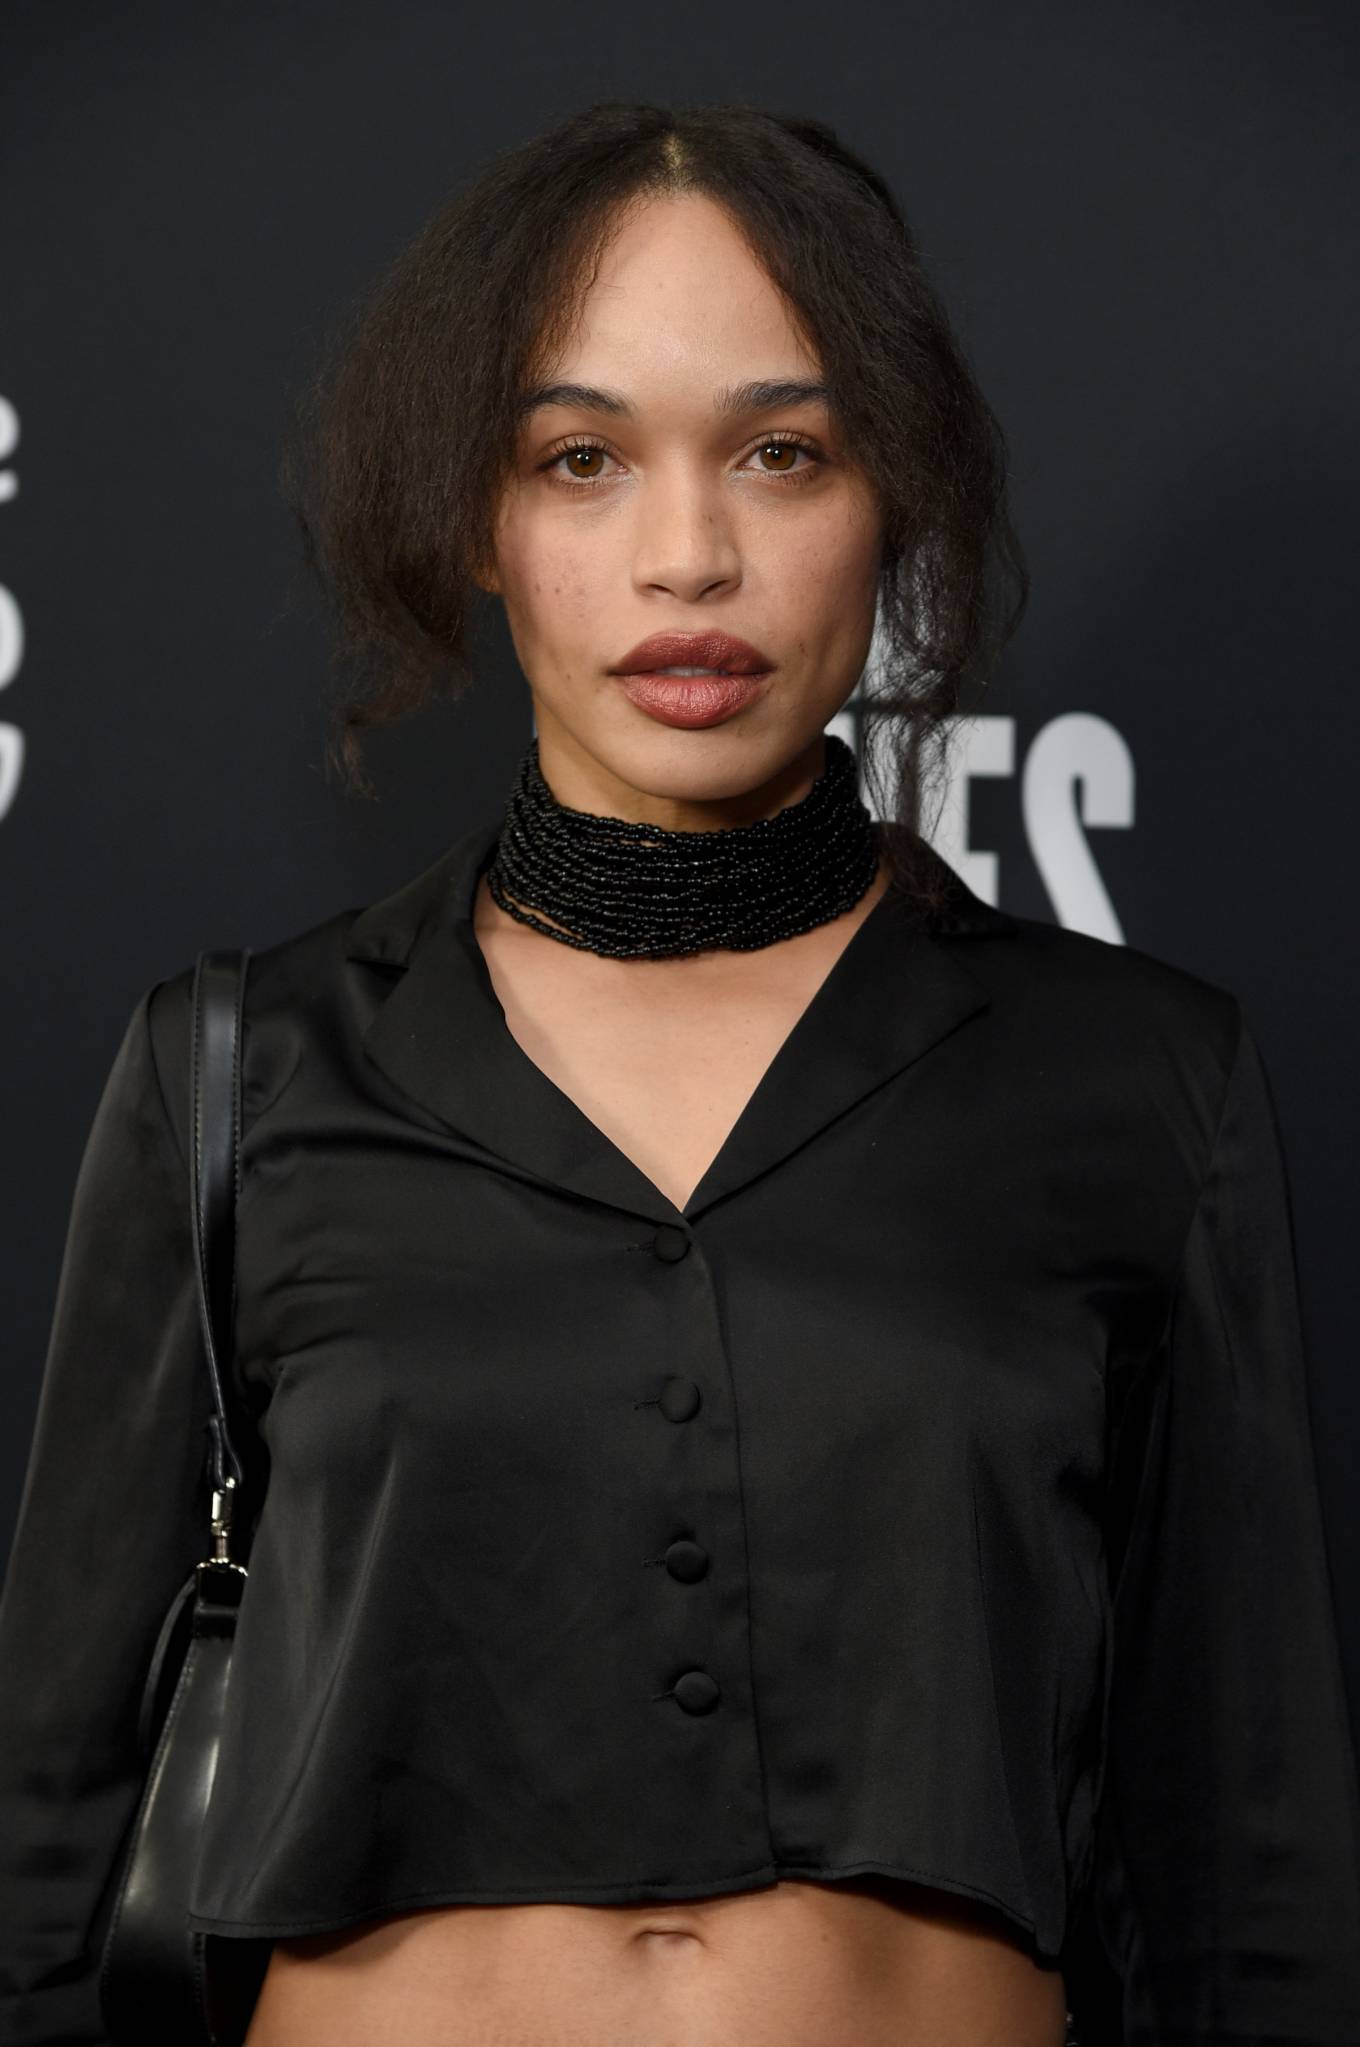 Cleopatra Coleman 2022 : Cleopatra Coleman – All The Old Knives Los Angeles Special Screening -01